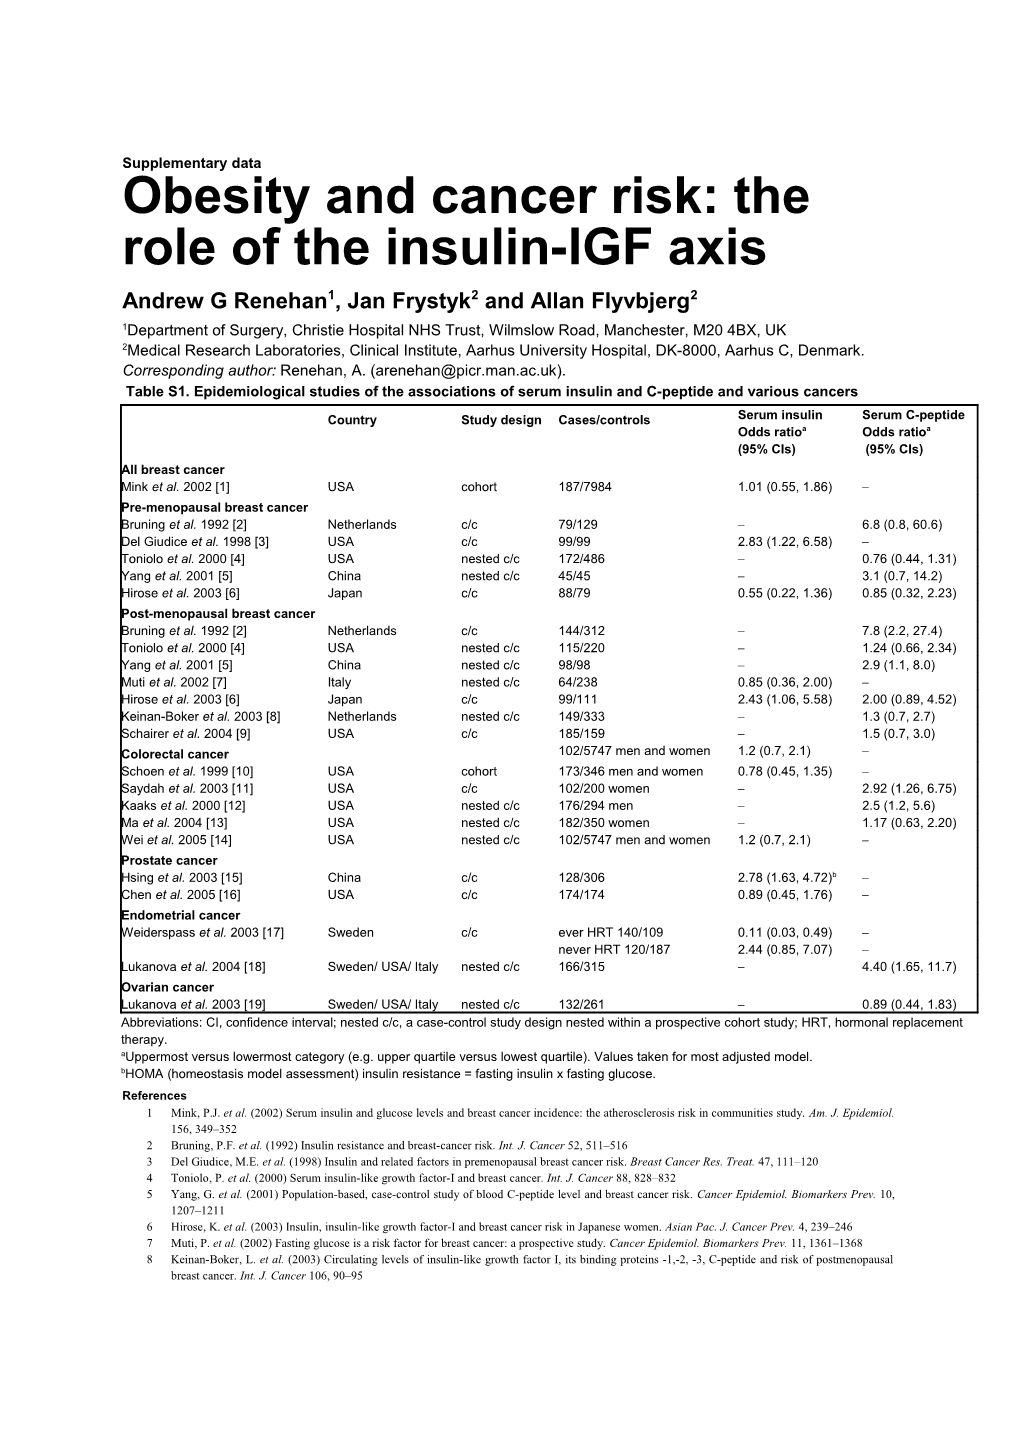 The Recognition That Serum IGF-I and IGF-II, Together with Their Binding Proteins, Are